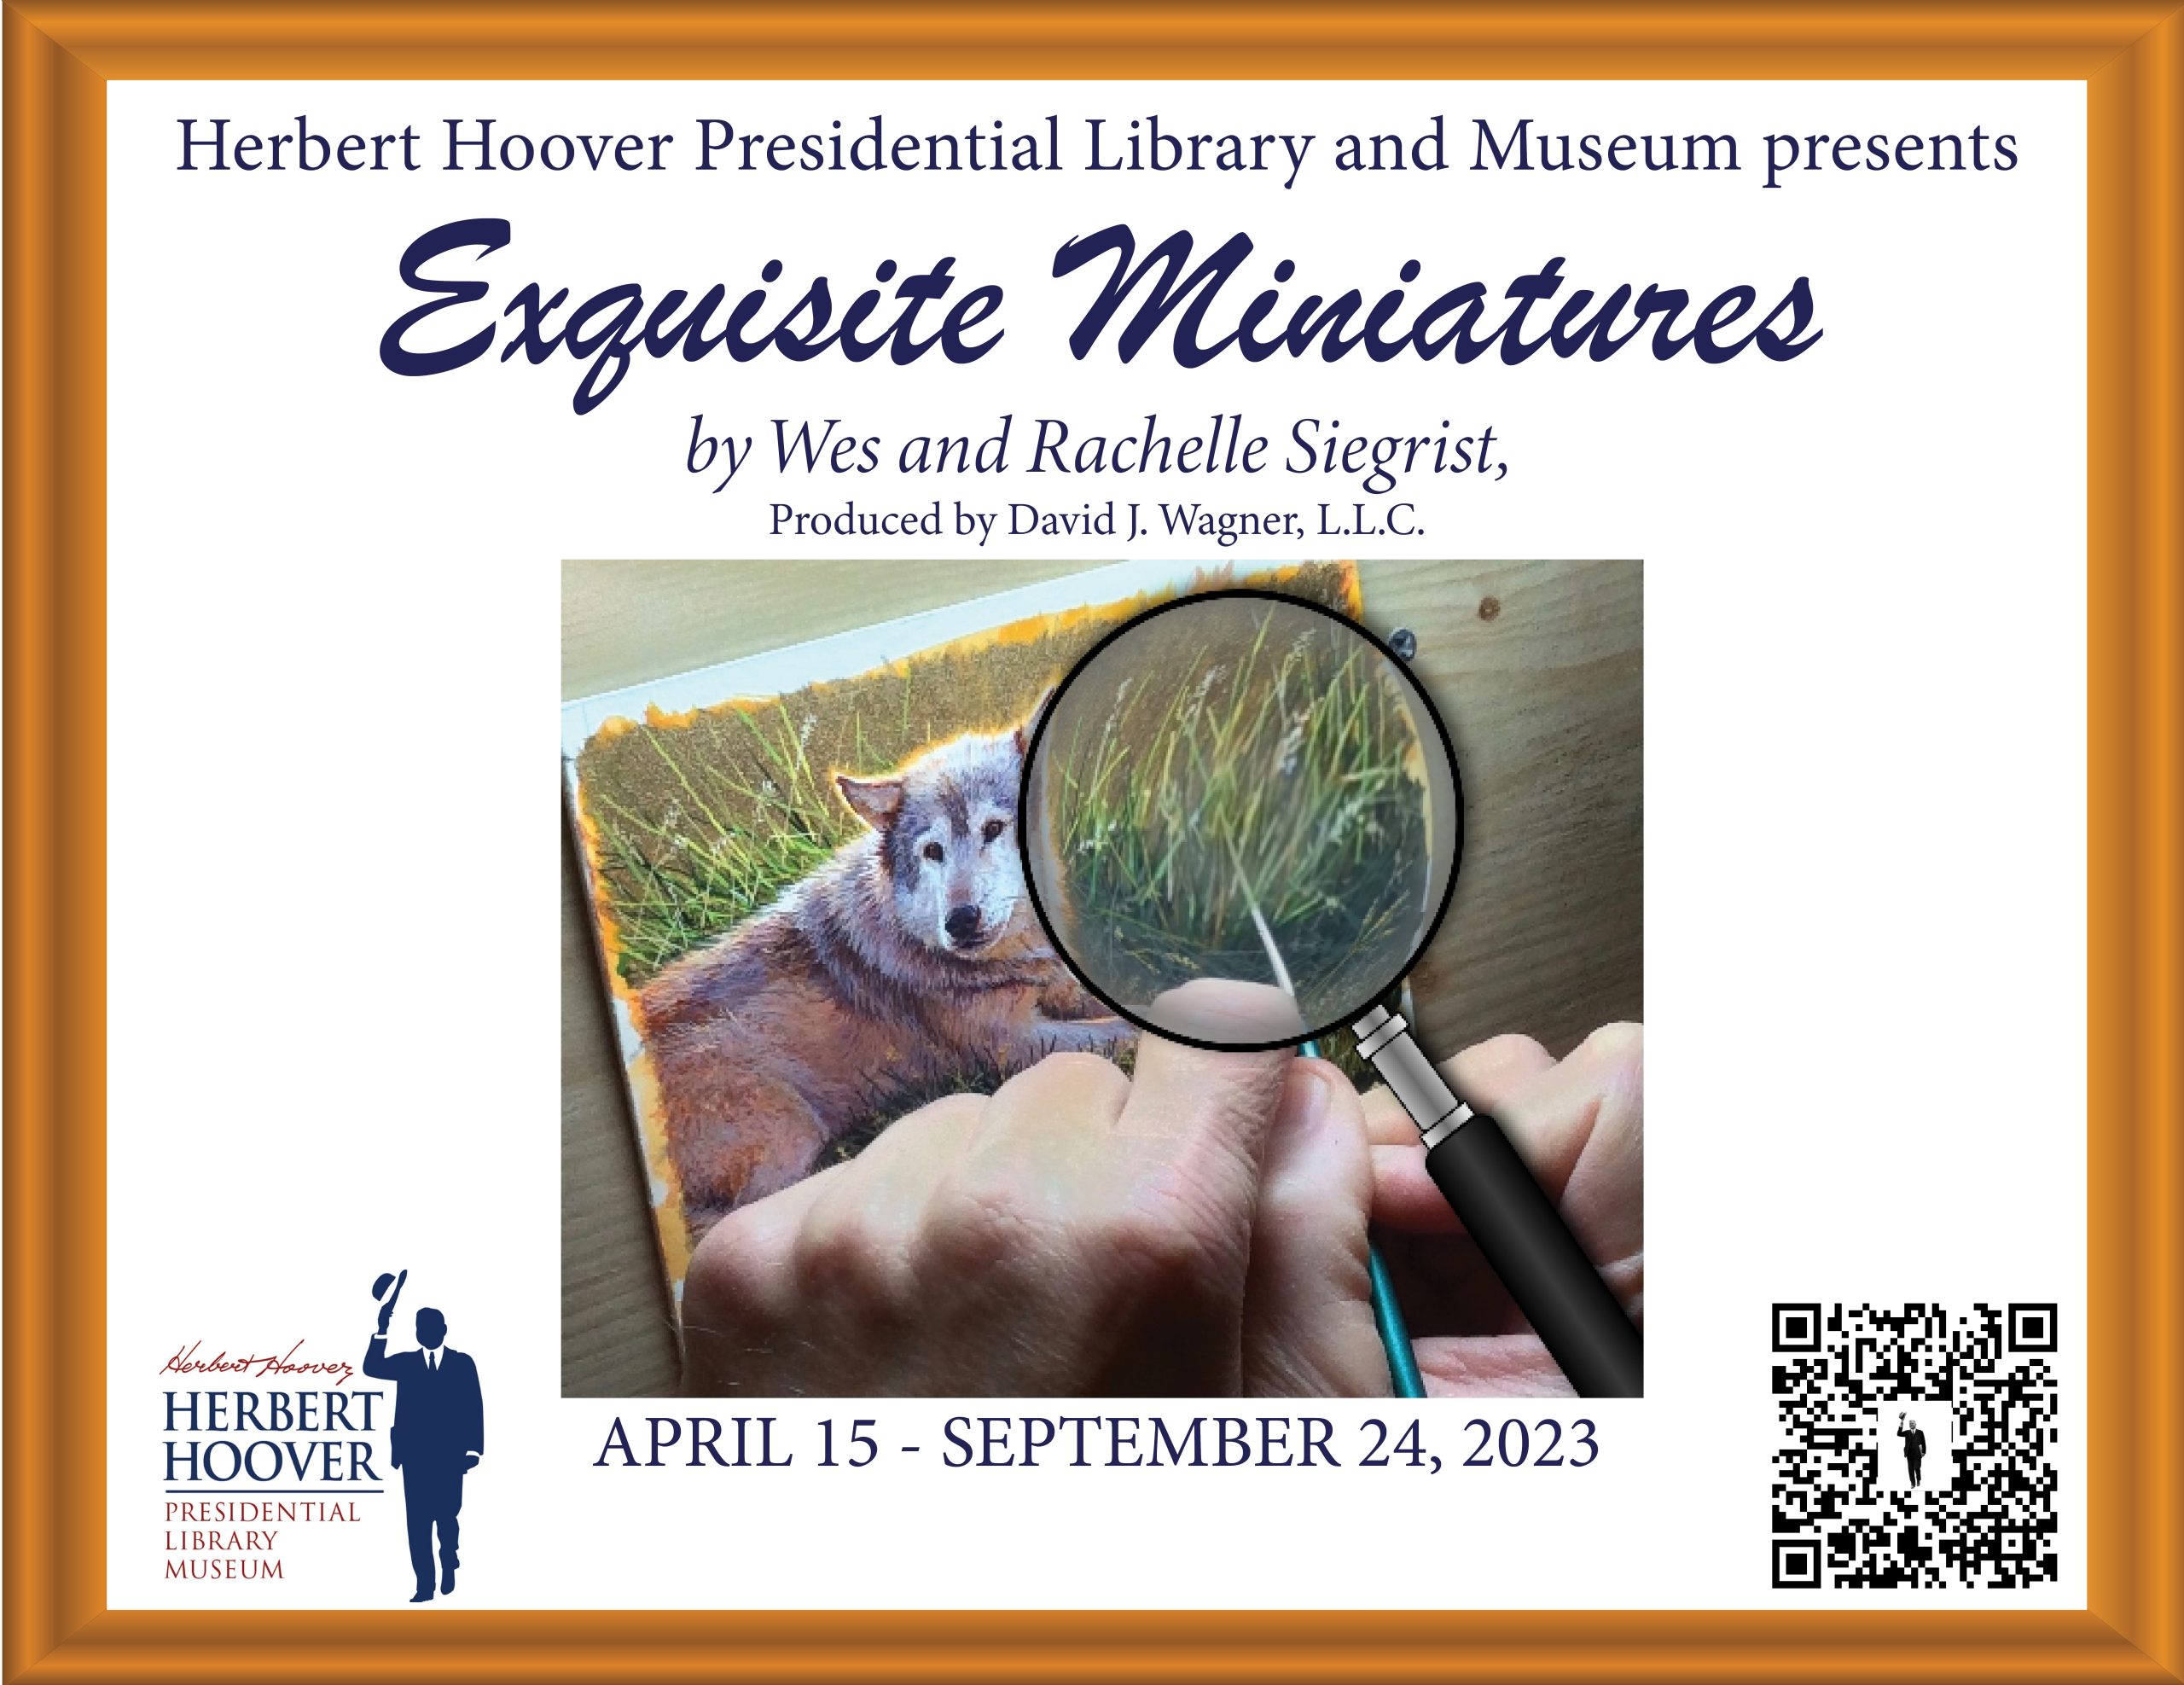 Exquisite Miniatures at the Herbert Hoover Presidential Library and Museum